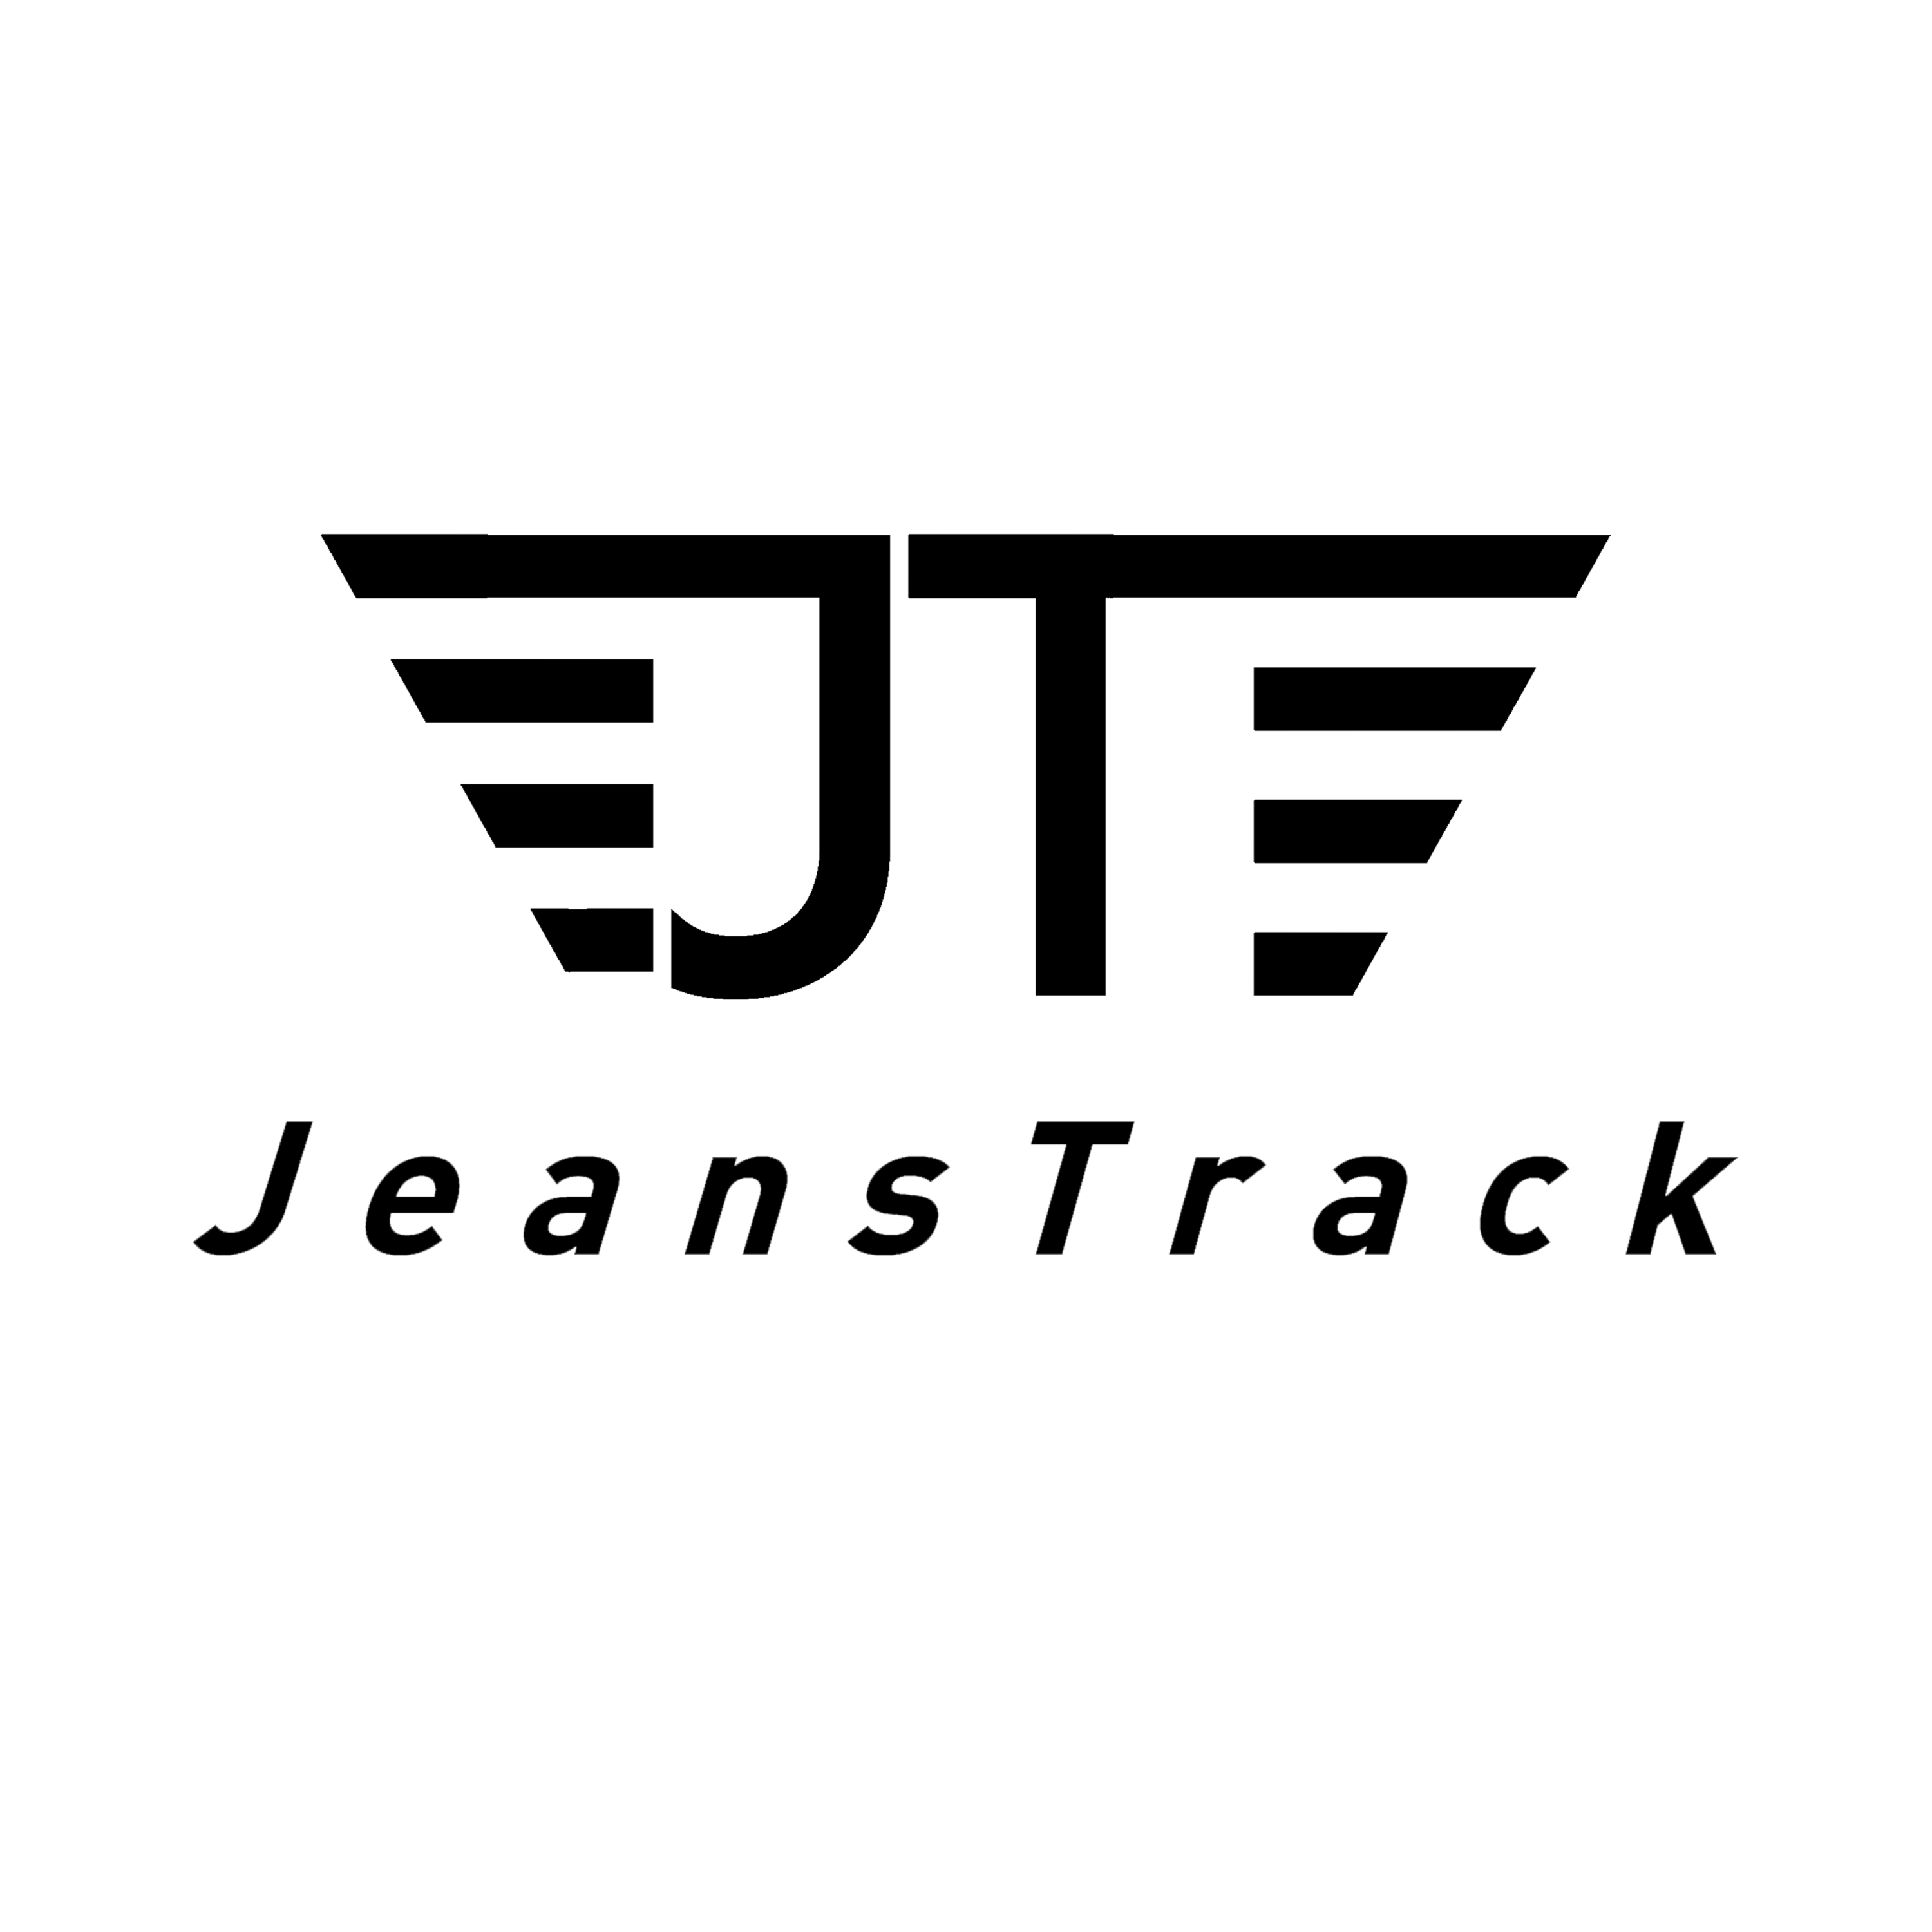 Productos JeansTrack